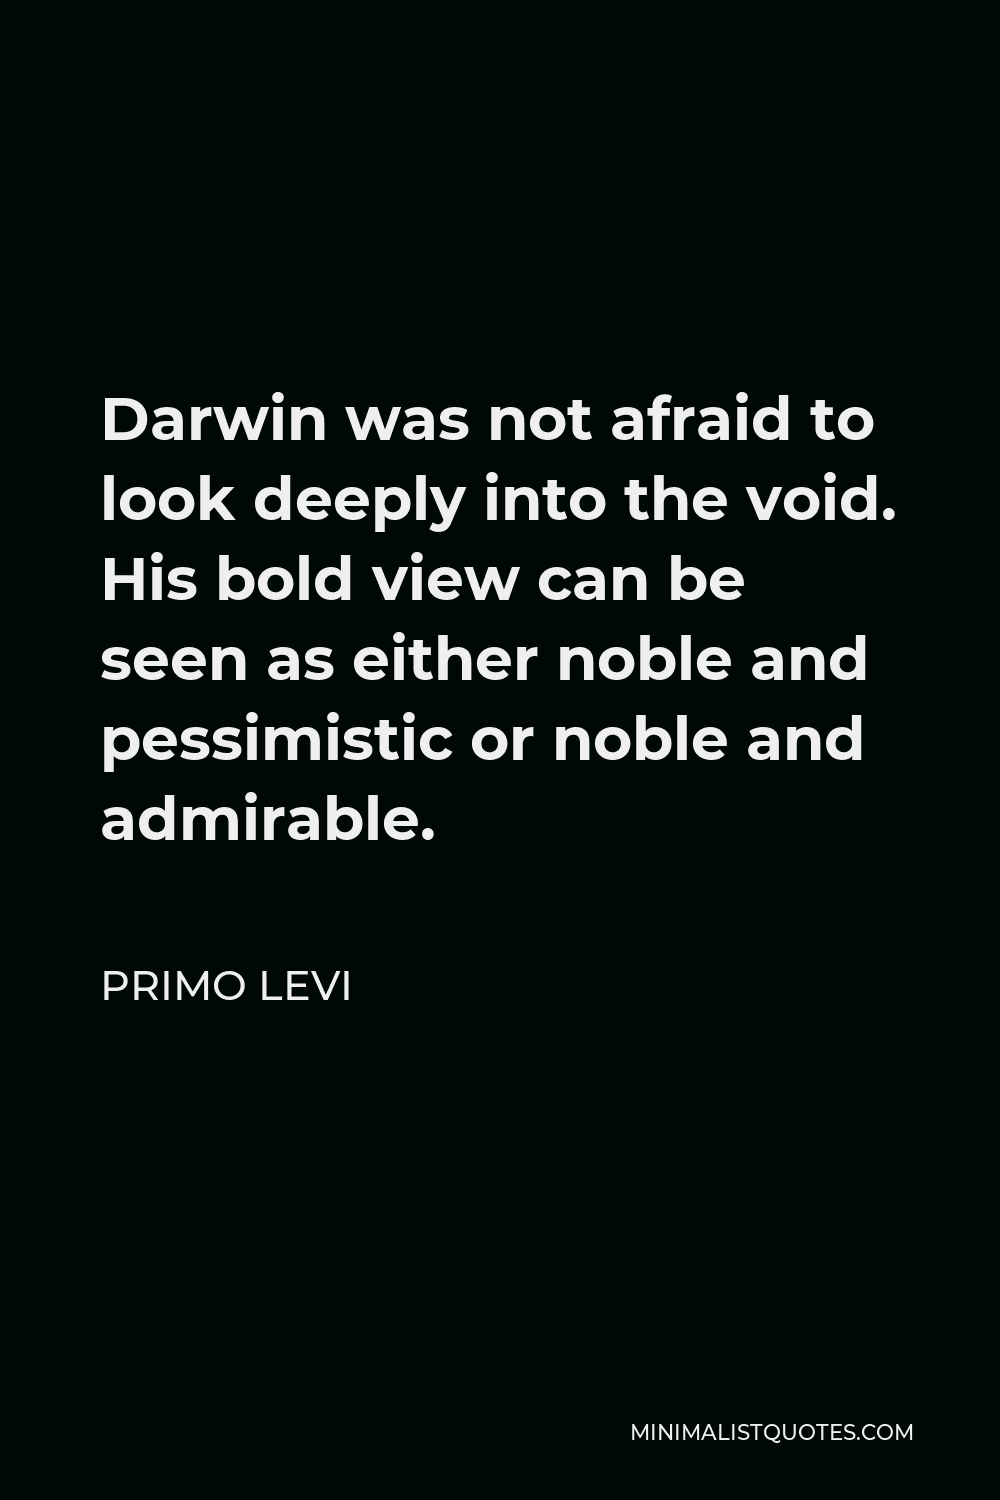 Primo Levi Quote - Darwin was not afraid to look deeply into the void. His bold view can be seen as either noble and pessimistic or noble and admirable.